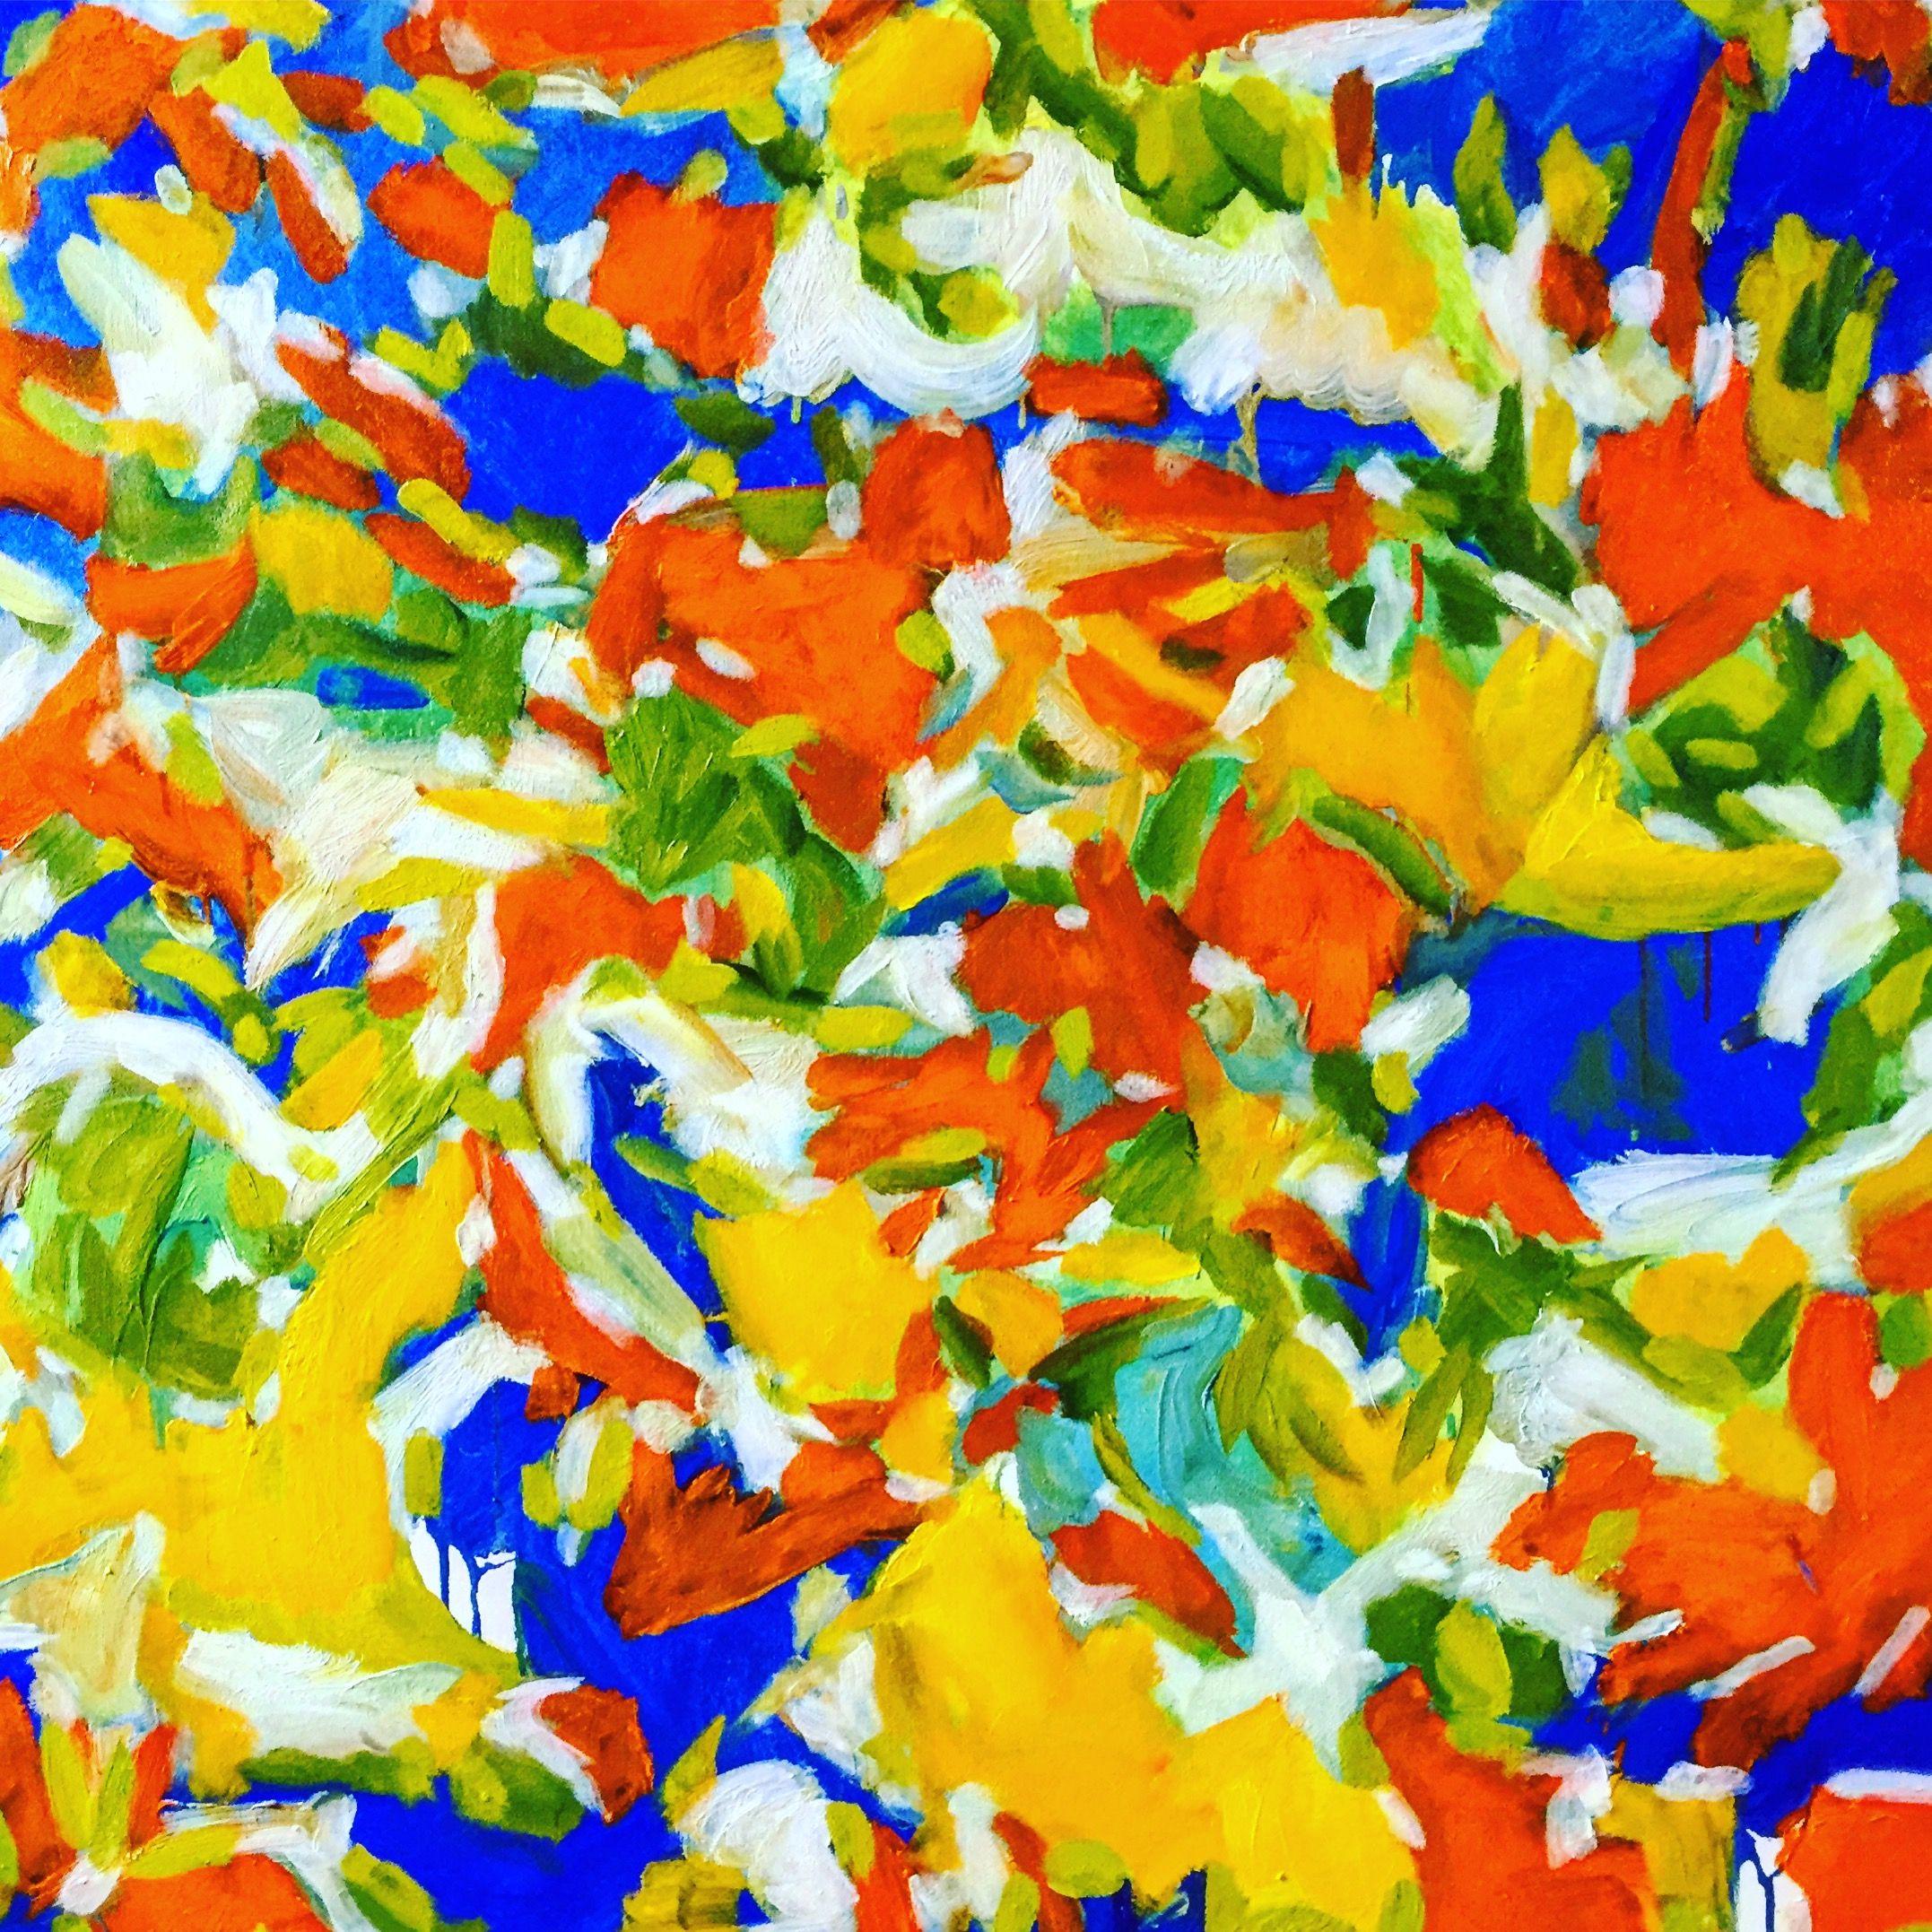 Oil On Canvas Inspired By Nature.  My Abstract Paintings Are All About Creating Excitement For The Viewer Through Concentrated Exploration. Each Painting Is Inspired By Nature, Travels, Or Imagination And Created To Embody Immediate Impact And